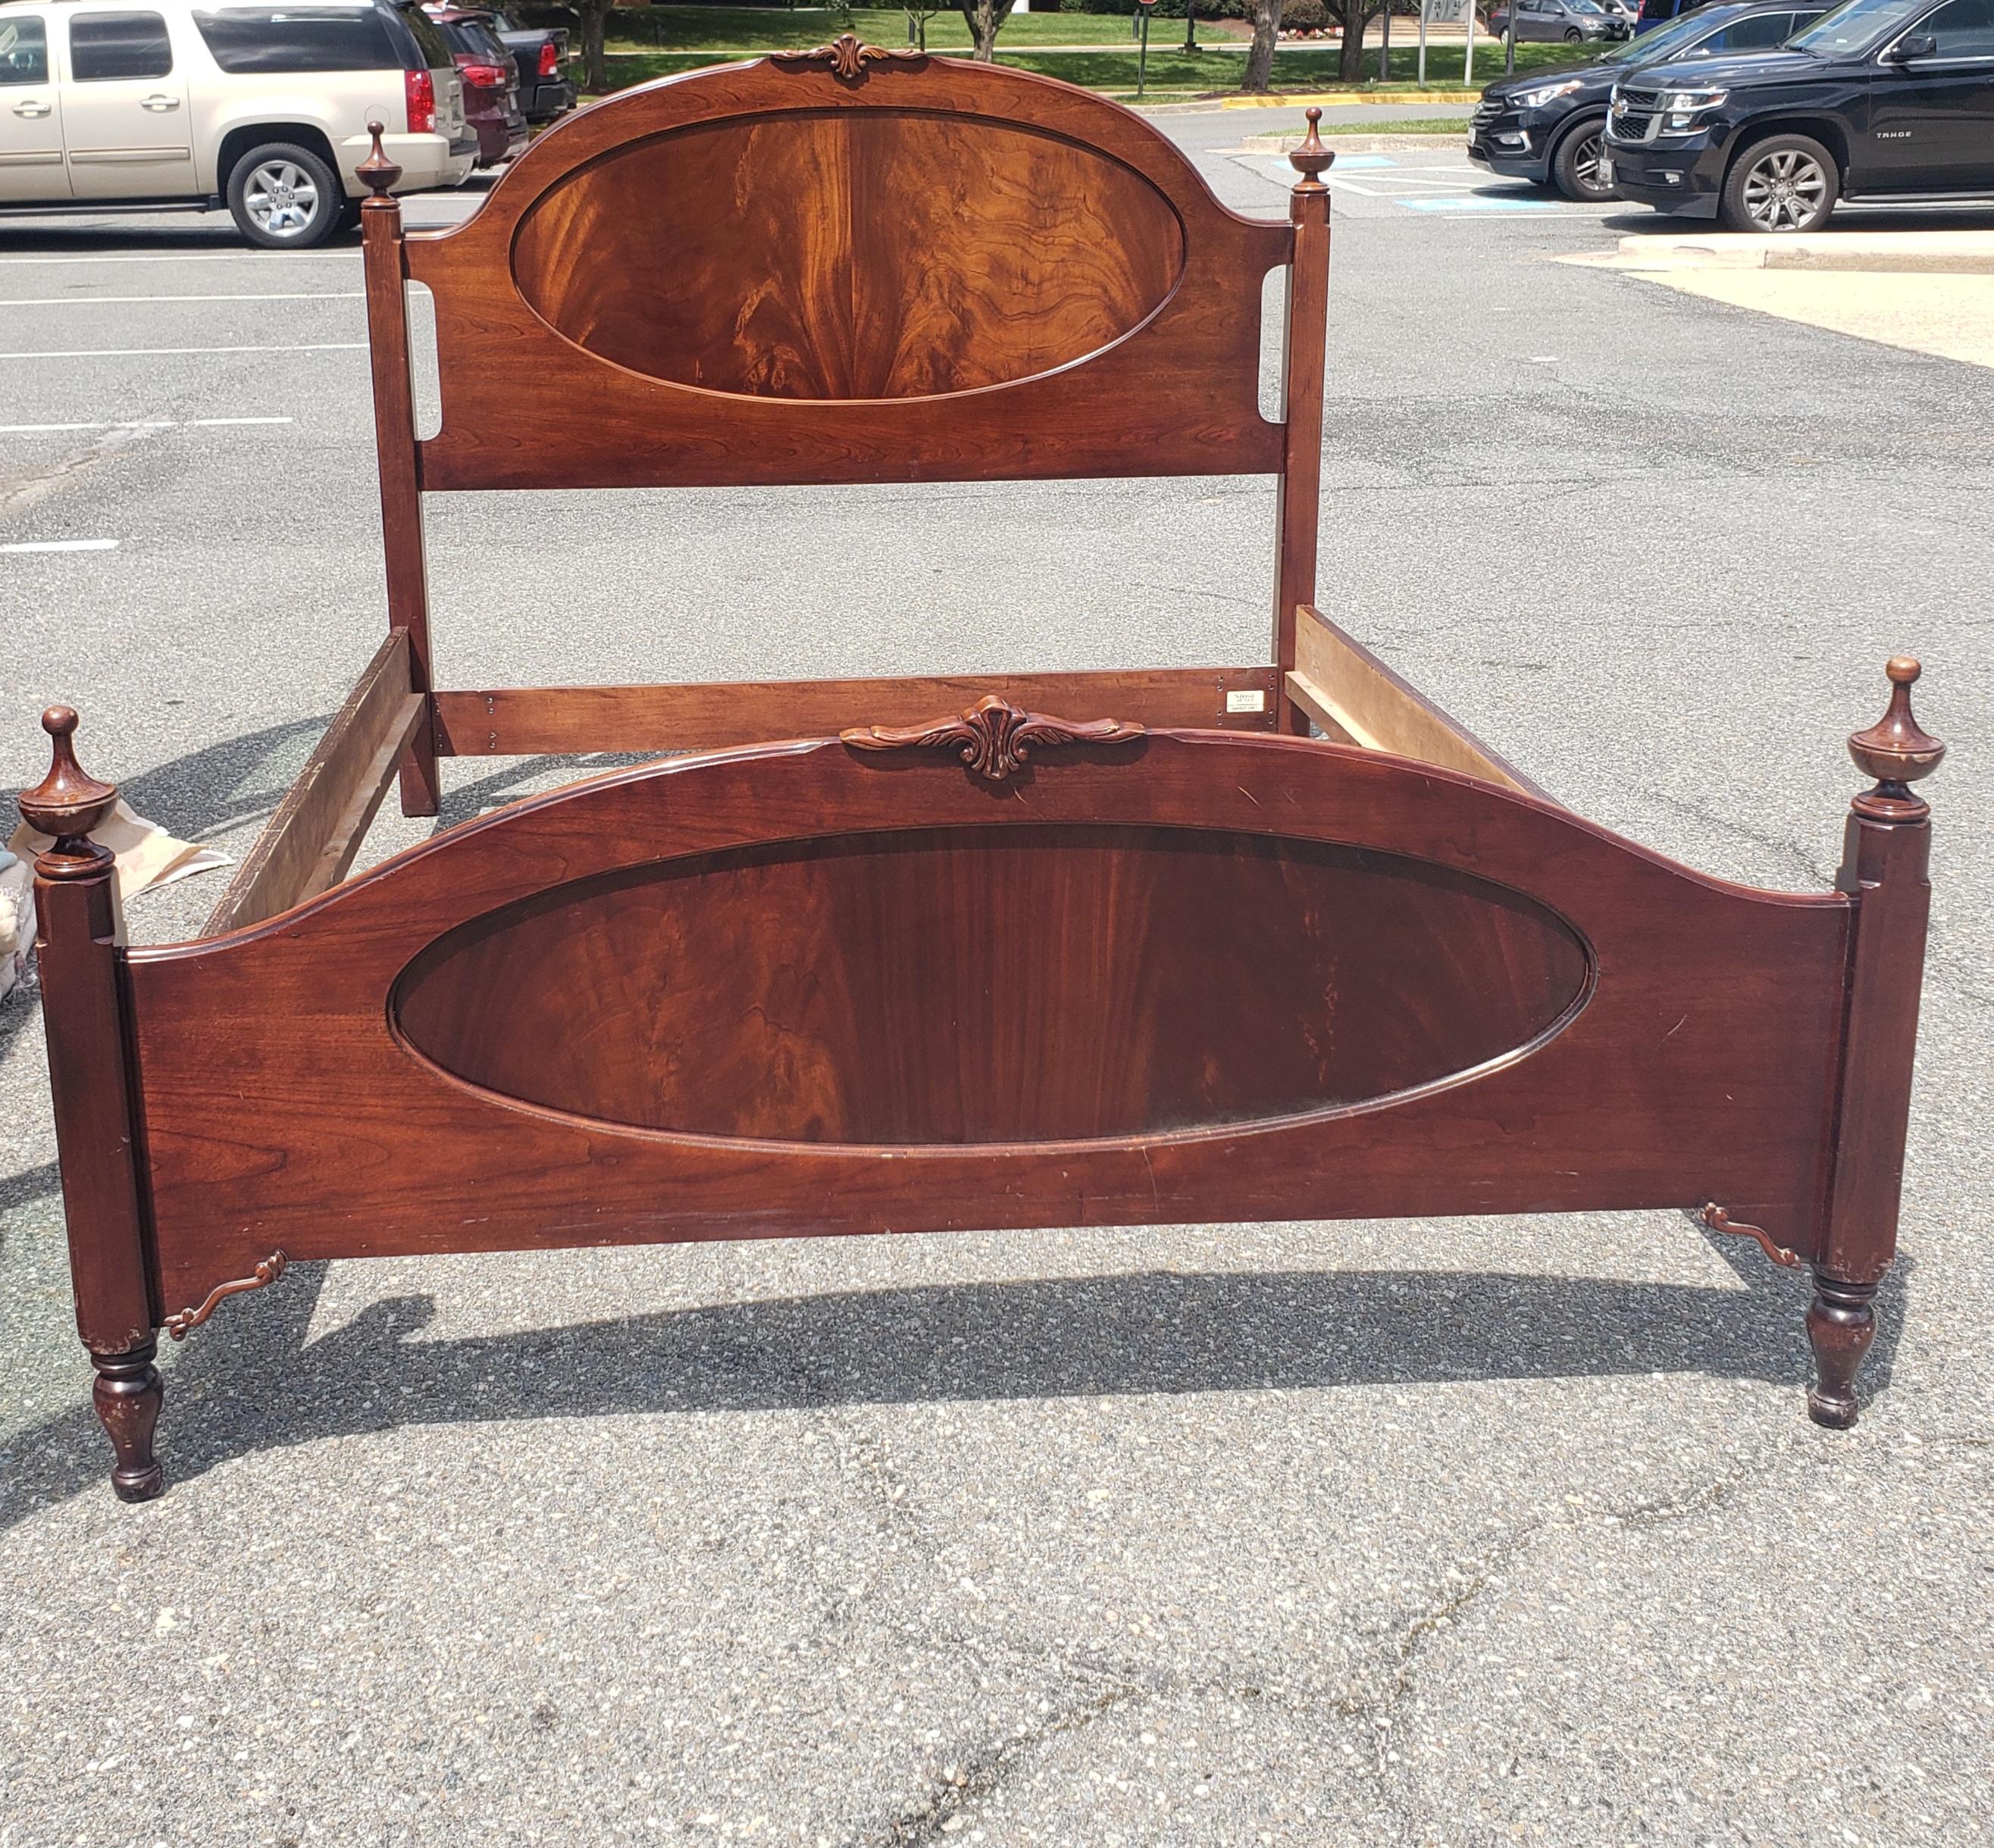 National Mount Airy Flame Mahogany Queen Size Bedstead in good vintage condition. Measures 64